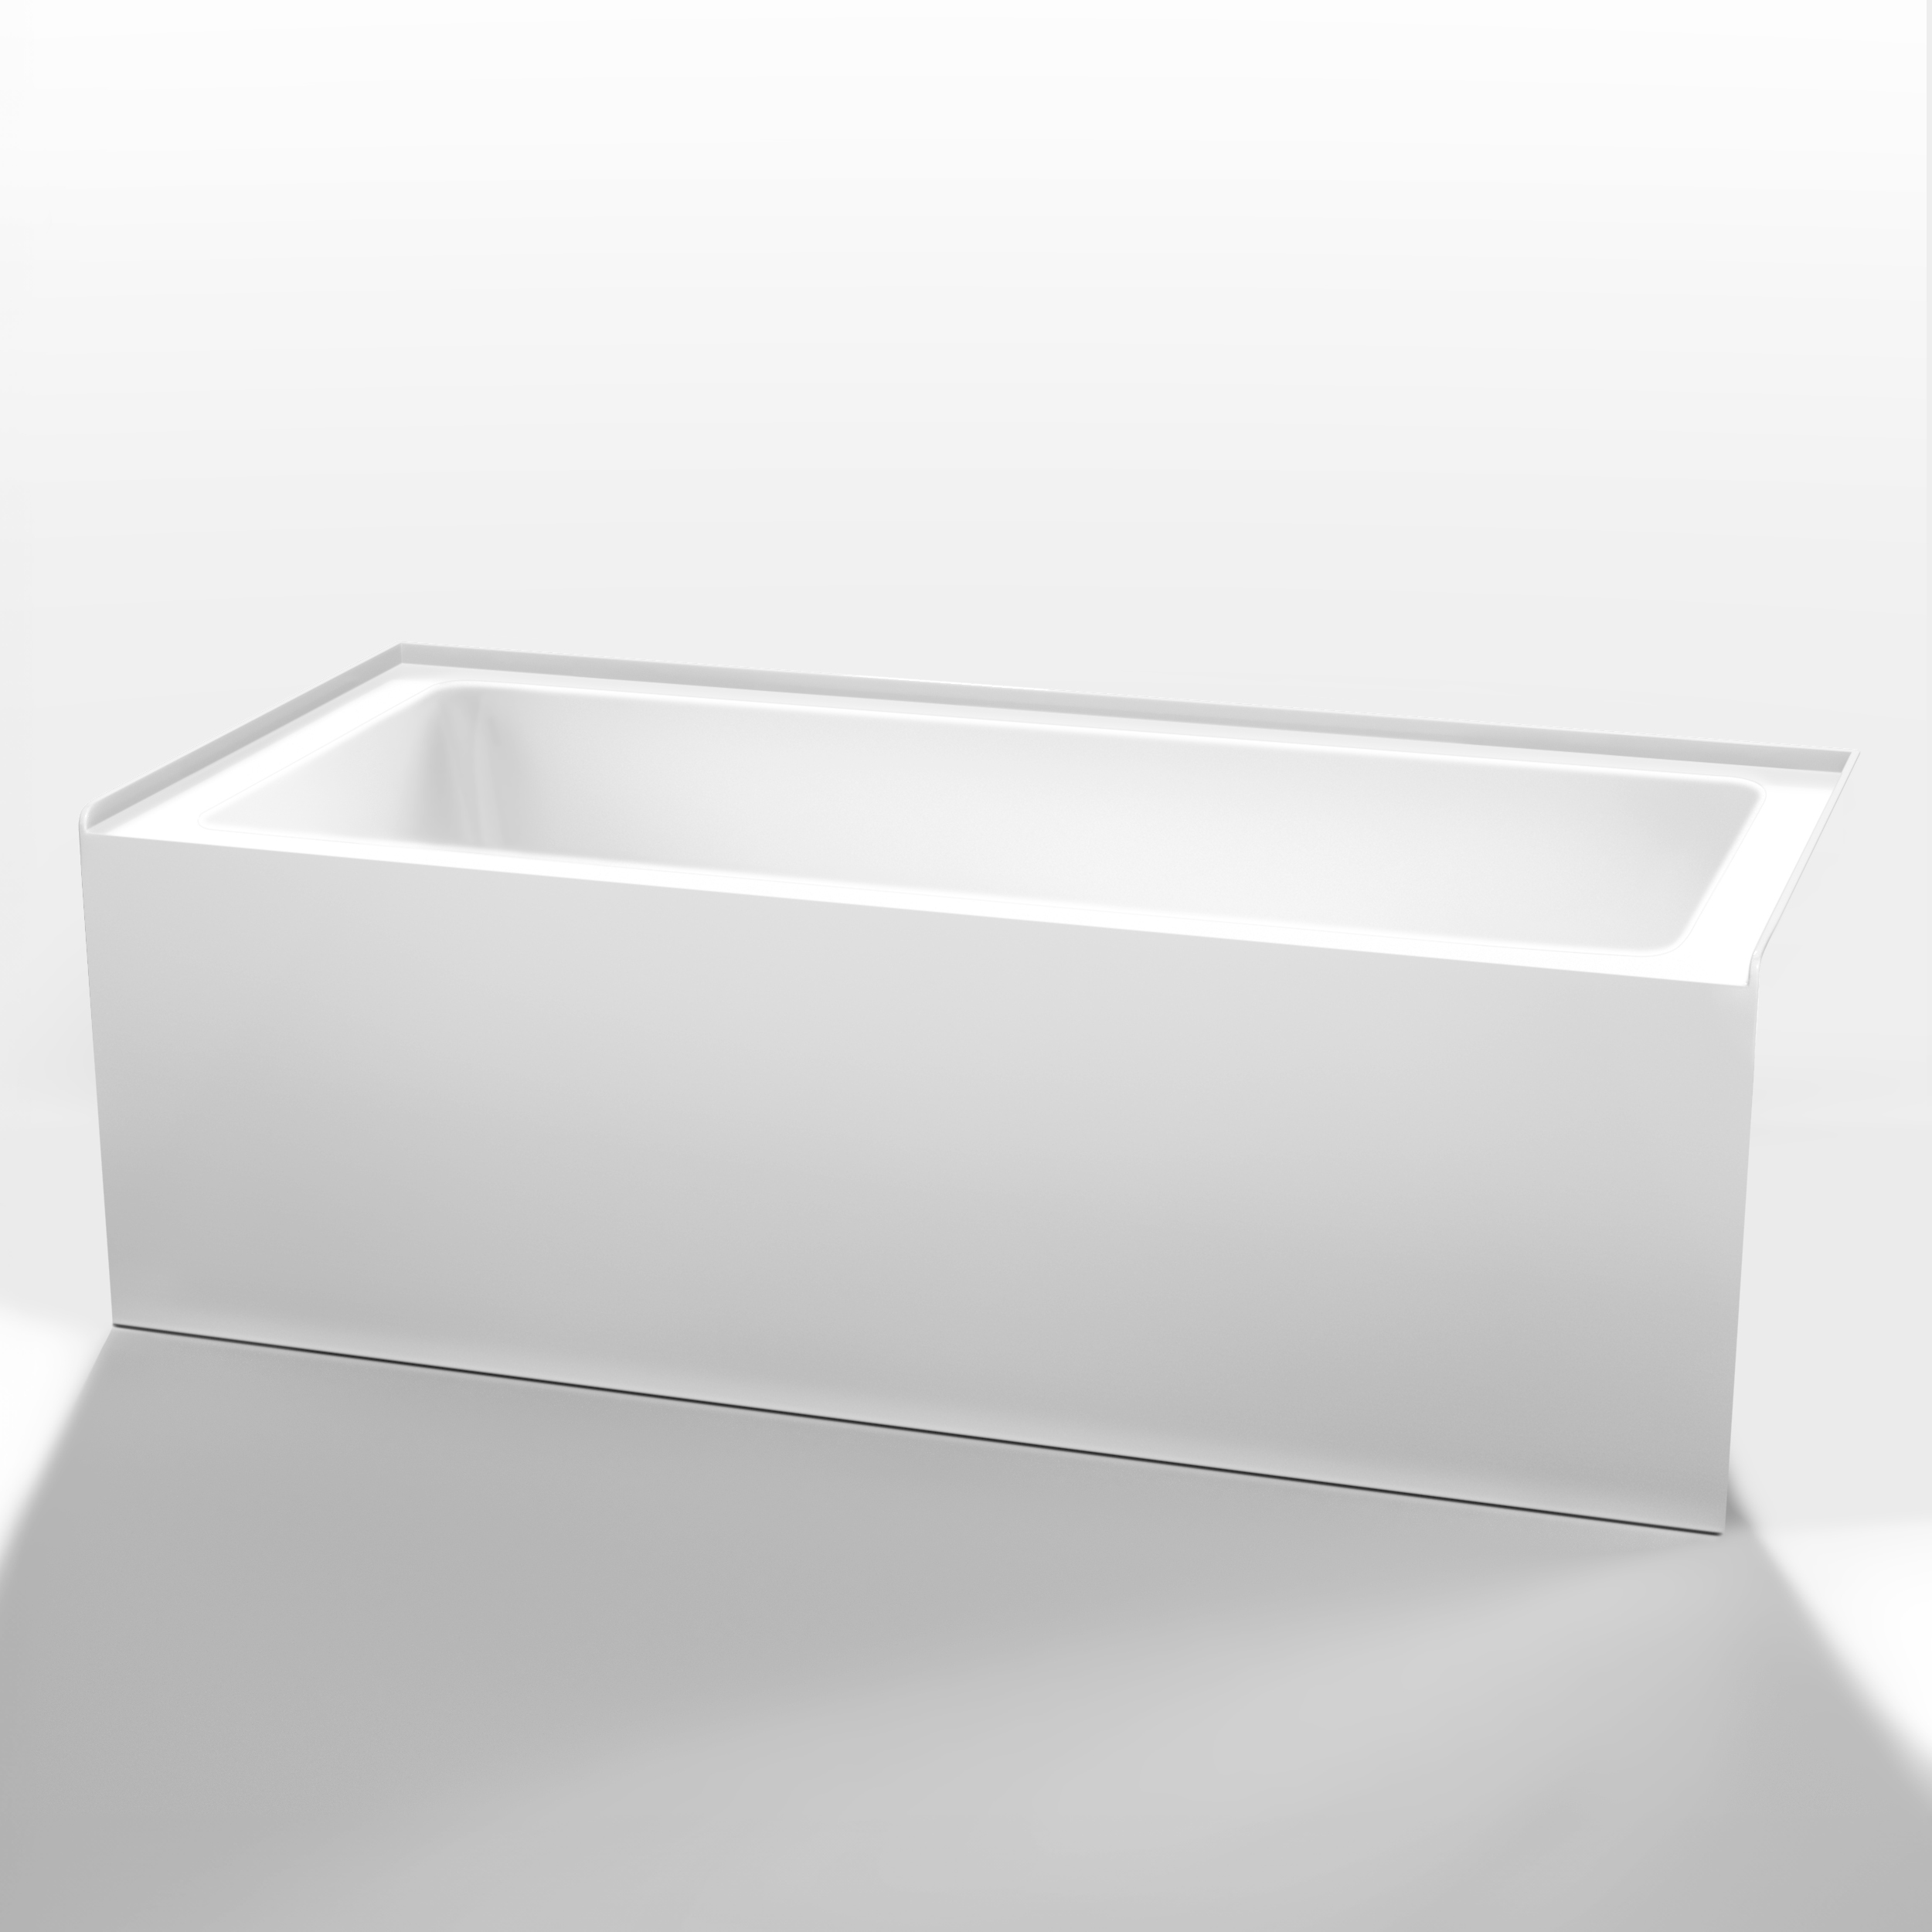 Grayley Alcove 66" Bathtub, Right Side Drain by Wyndham Collection - White WC-BTE-6632R